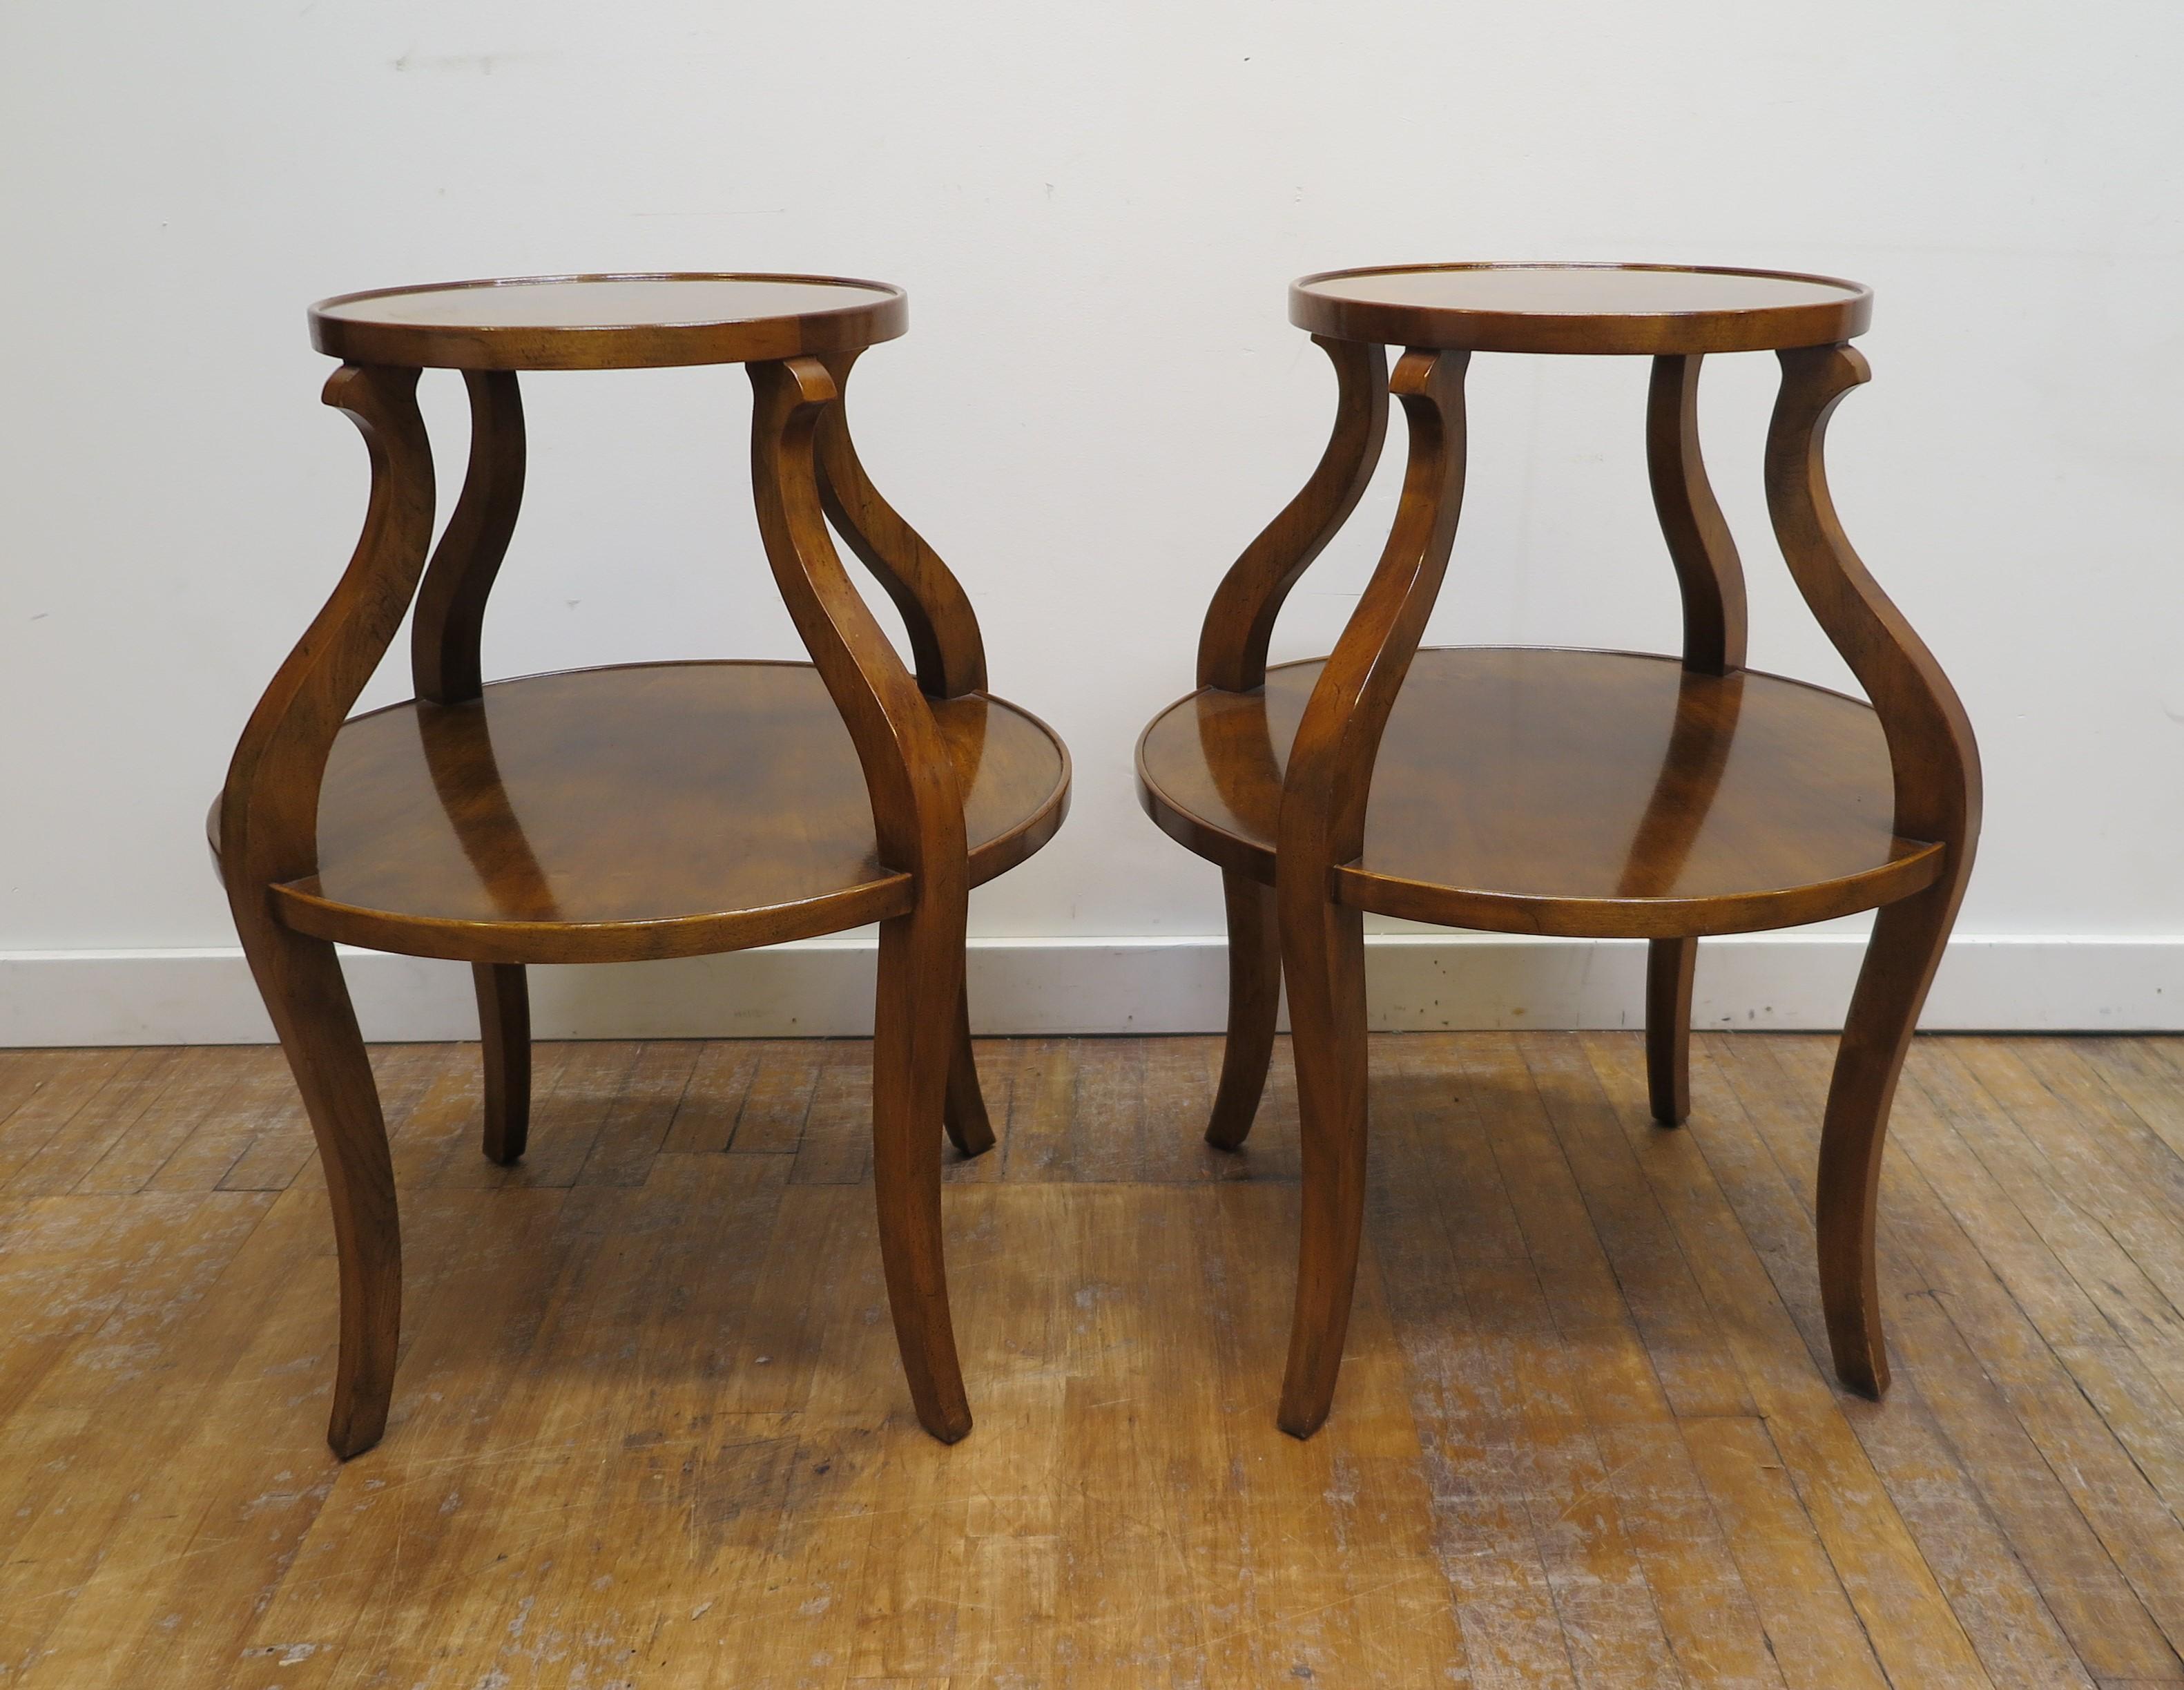 A pair of mid century Tiered round side tables. American mid century tiered round side tables in walnut. The top shelf floating set on cabriole style legs, with the lower shelf as struts. Raised lip rim to both tiers, elegantly shaped and of quality